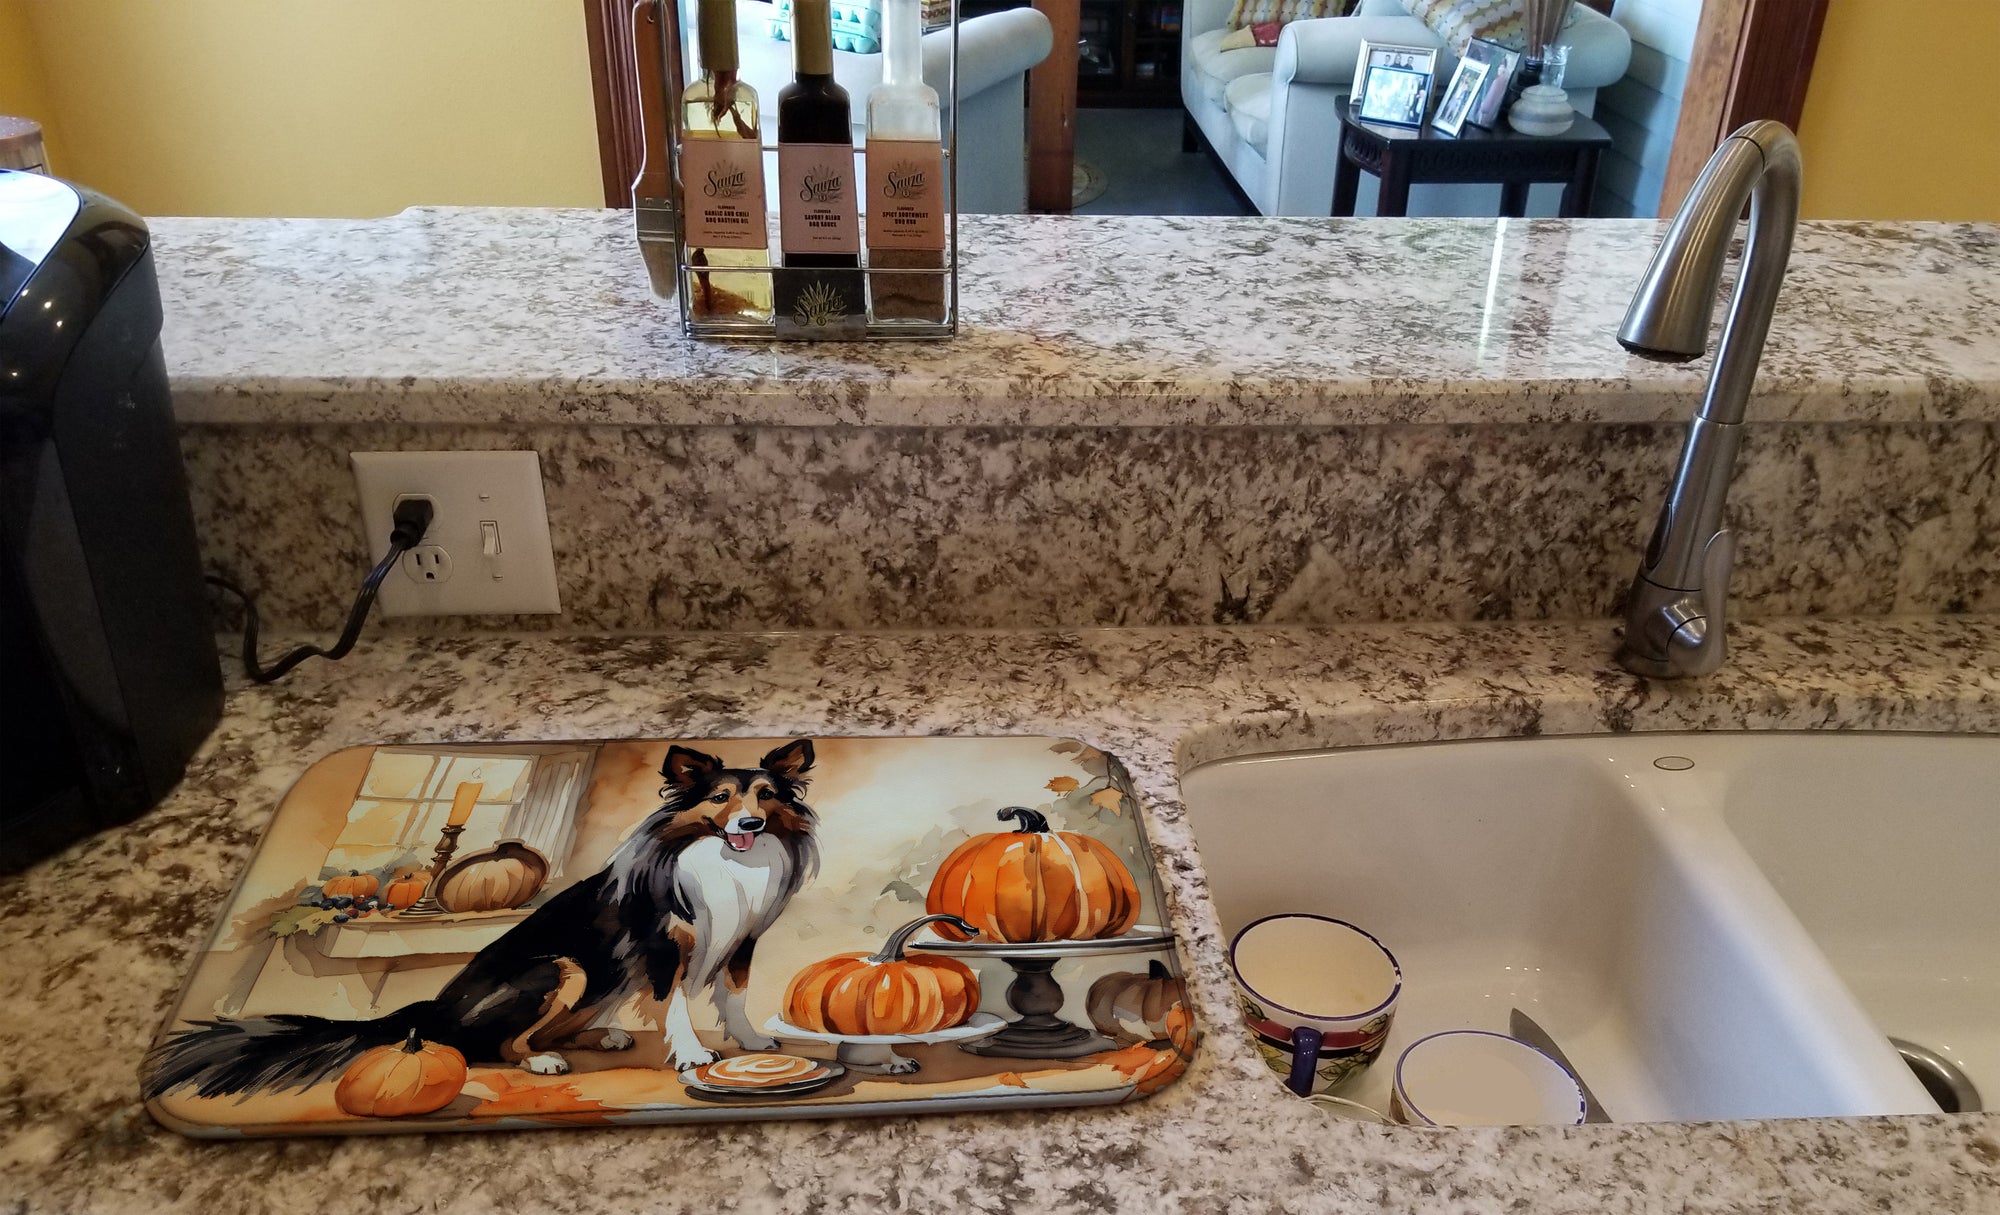 Buy this Collie Fall Kitchen Pumpkins Dish Drying Mat